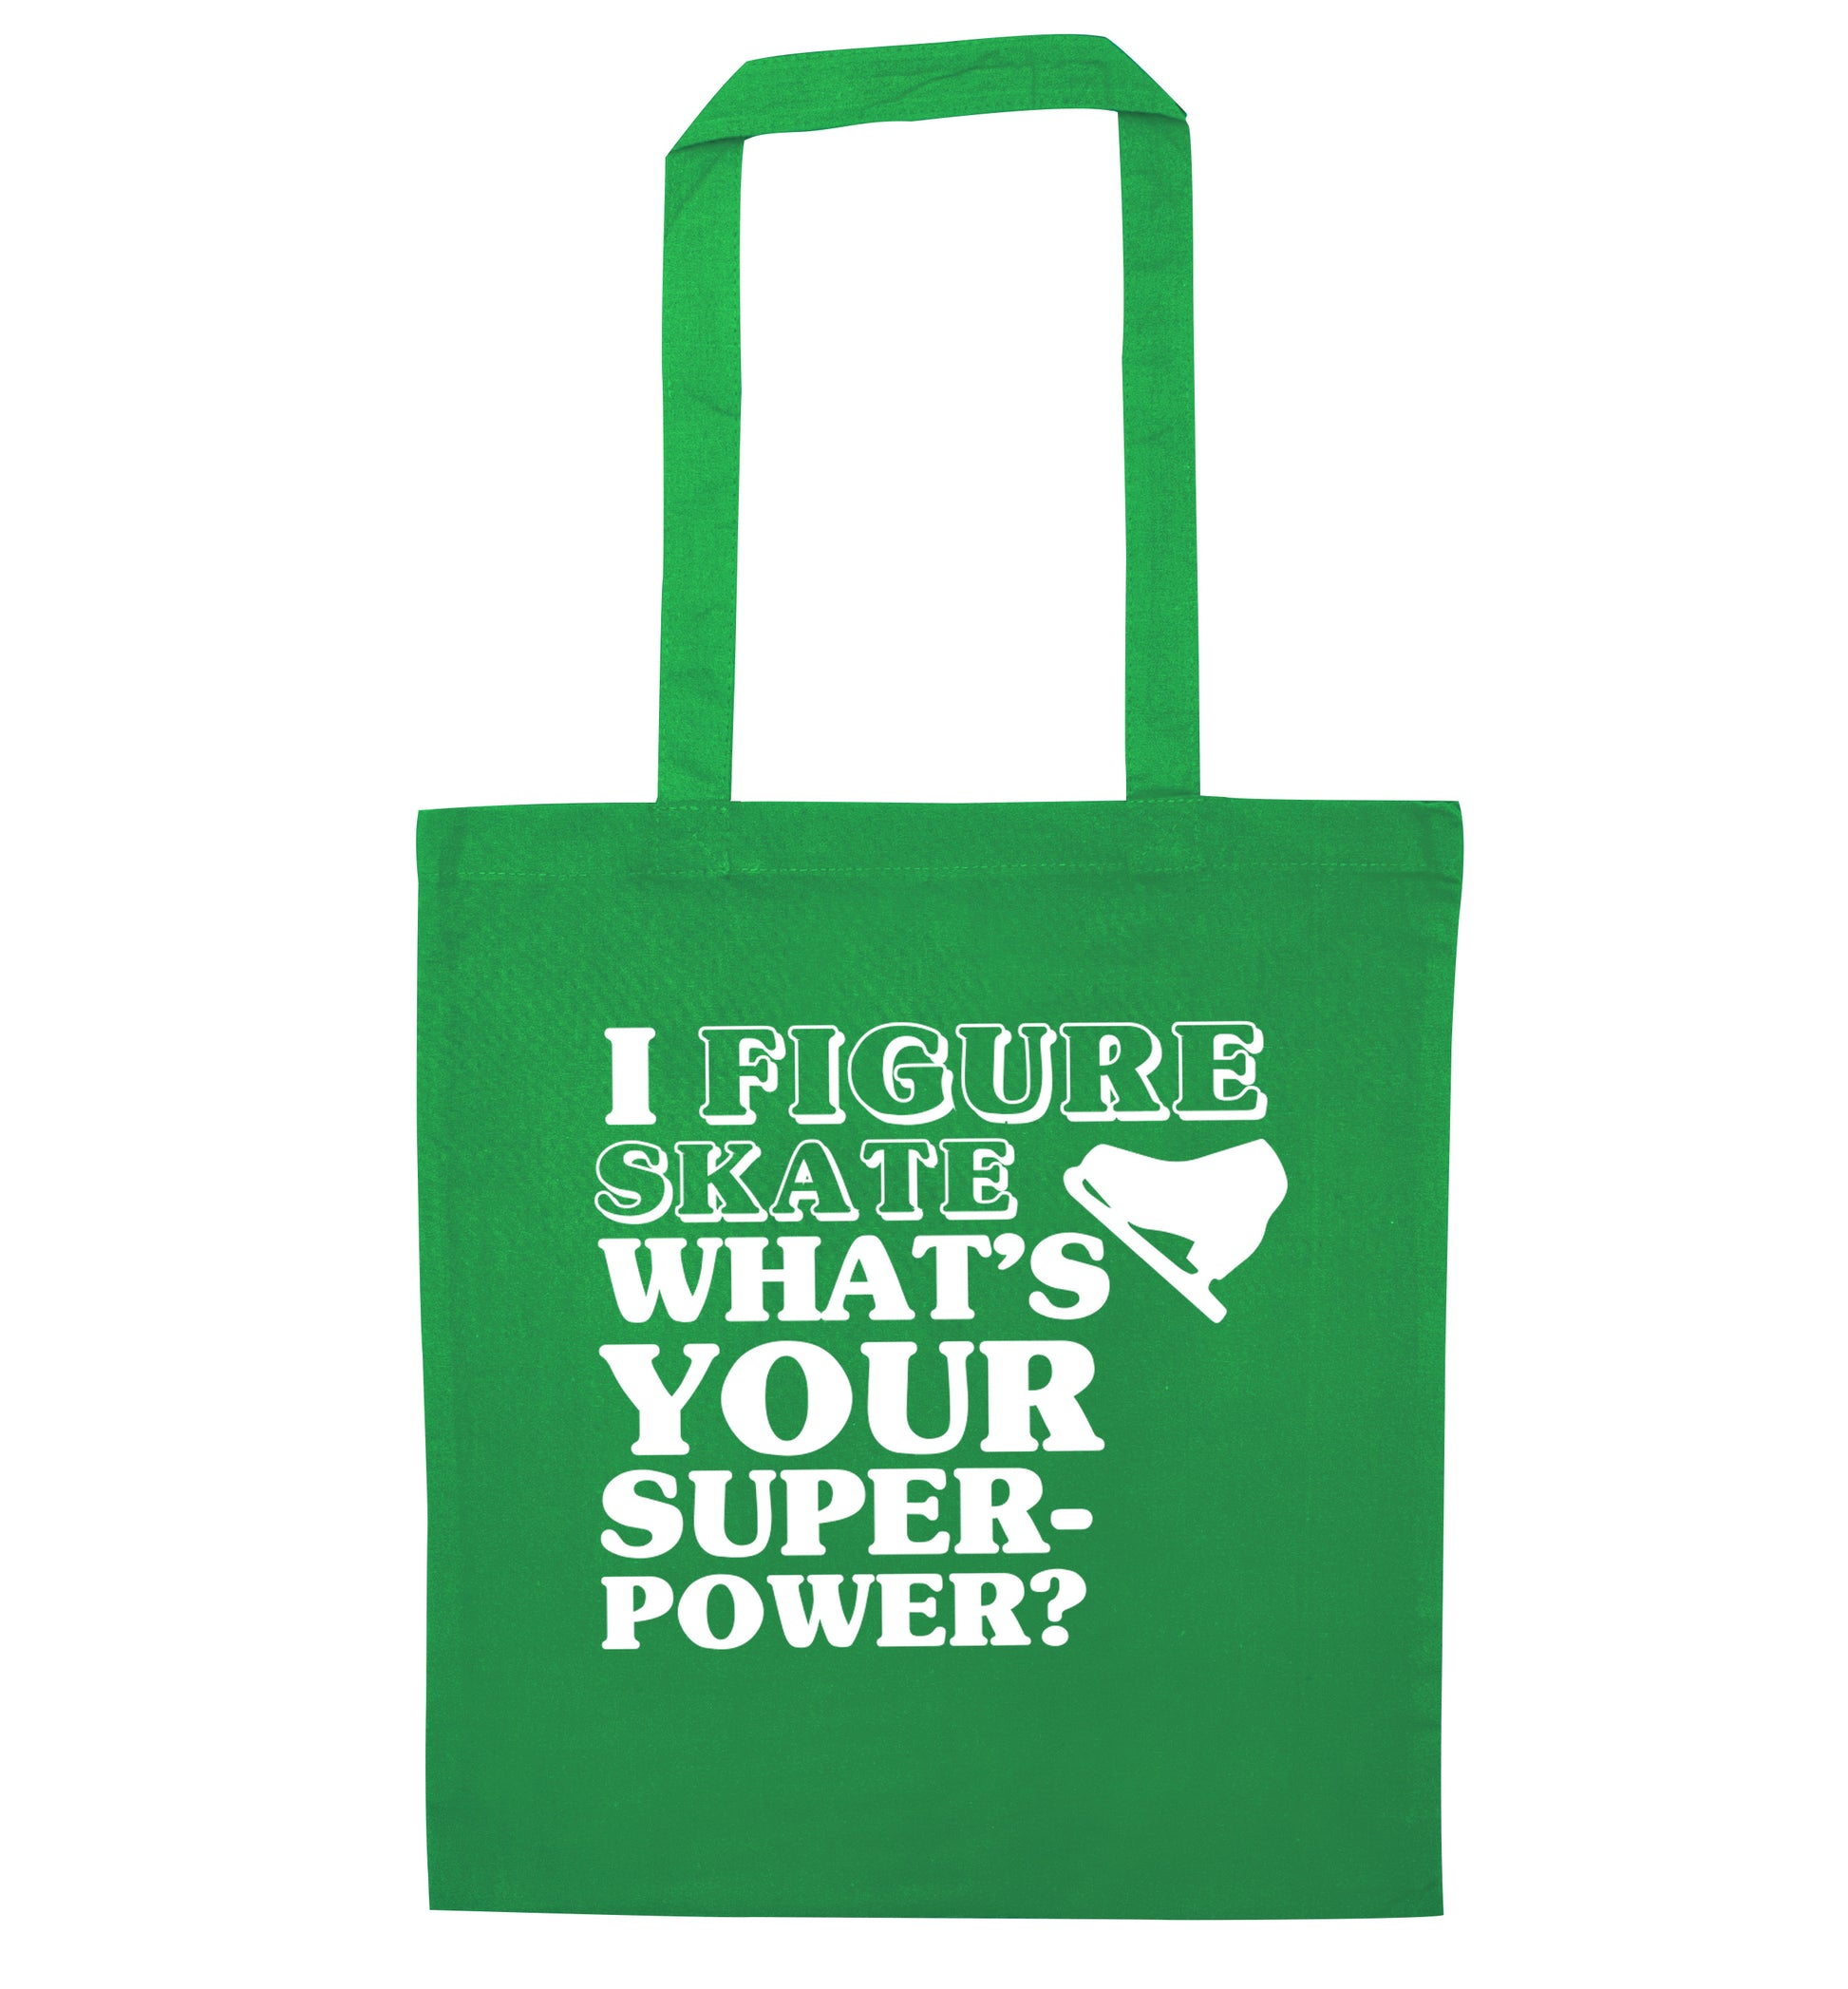 I figure skate what's your superpower? green tote bag